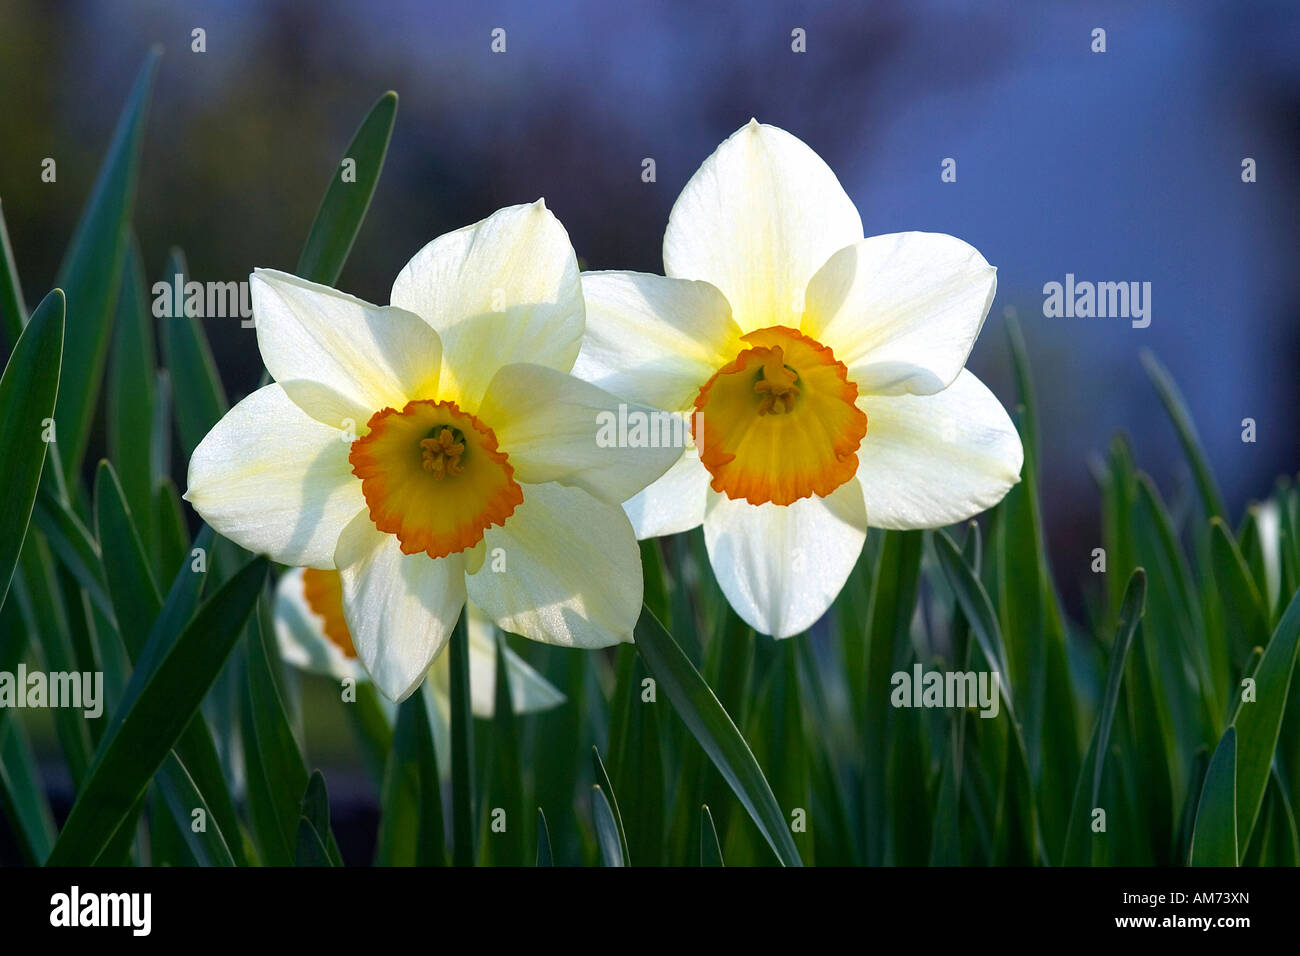 Giunchiglie in luce (Narcissus), Amaryllidaceae Foto Stock